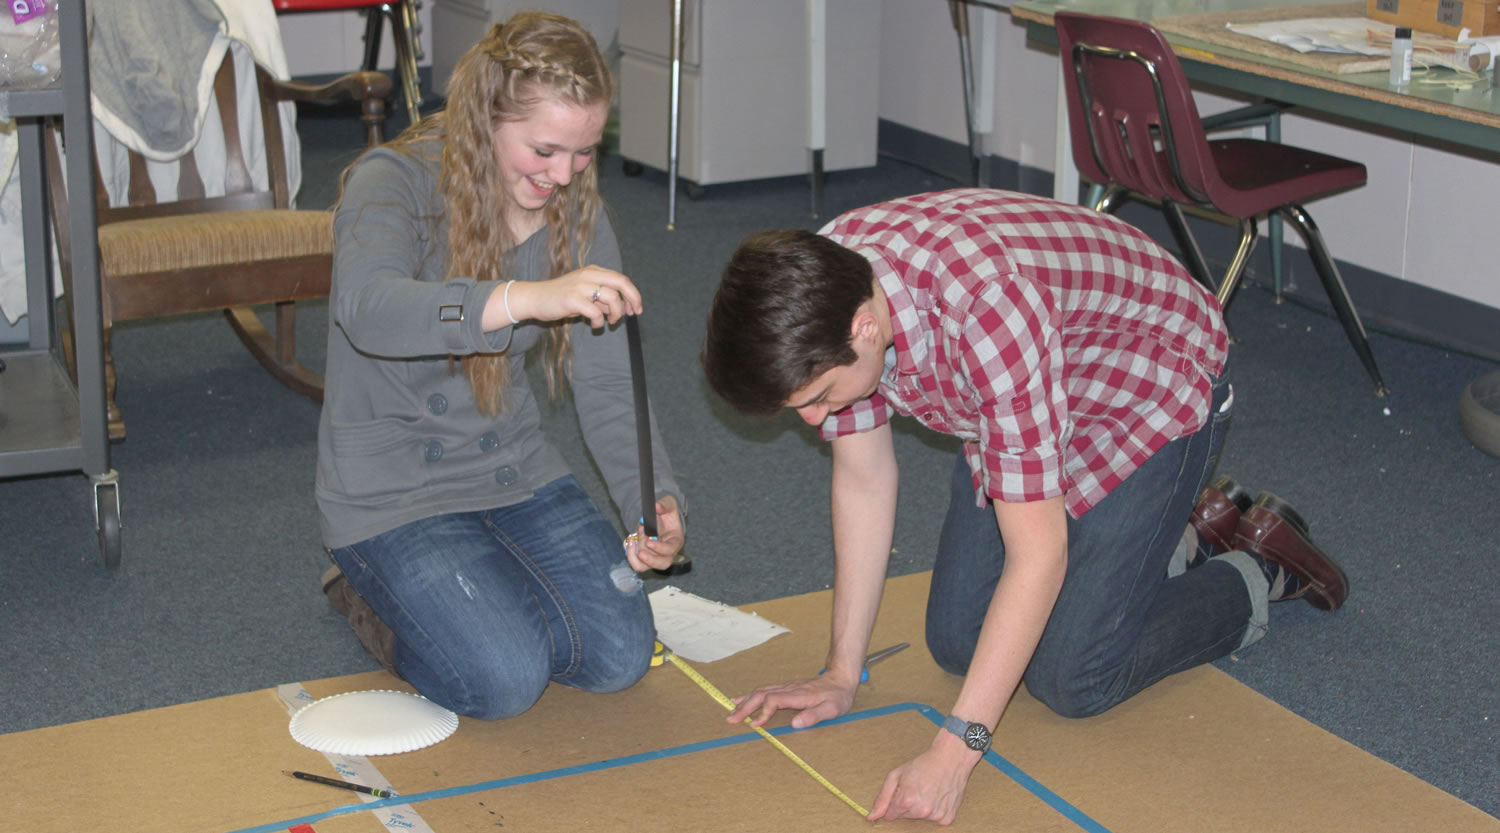 CHS Science Olympiad team members, including sophomore Katelynne Jones (left) and senior Ryan Gompertz (right) gathered Monday night to practice for the upcoming national tournament on May 20 and 21 in Wisconsin. Five days a week the team works out of its &quot;clubhouse,&quot; one of the portables at Lacamas Heights Elementary School.